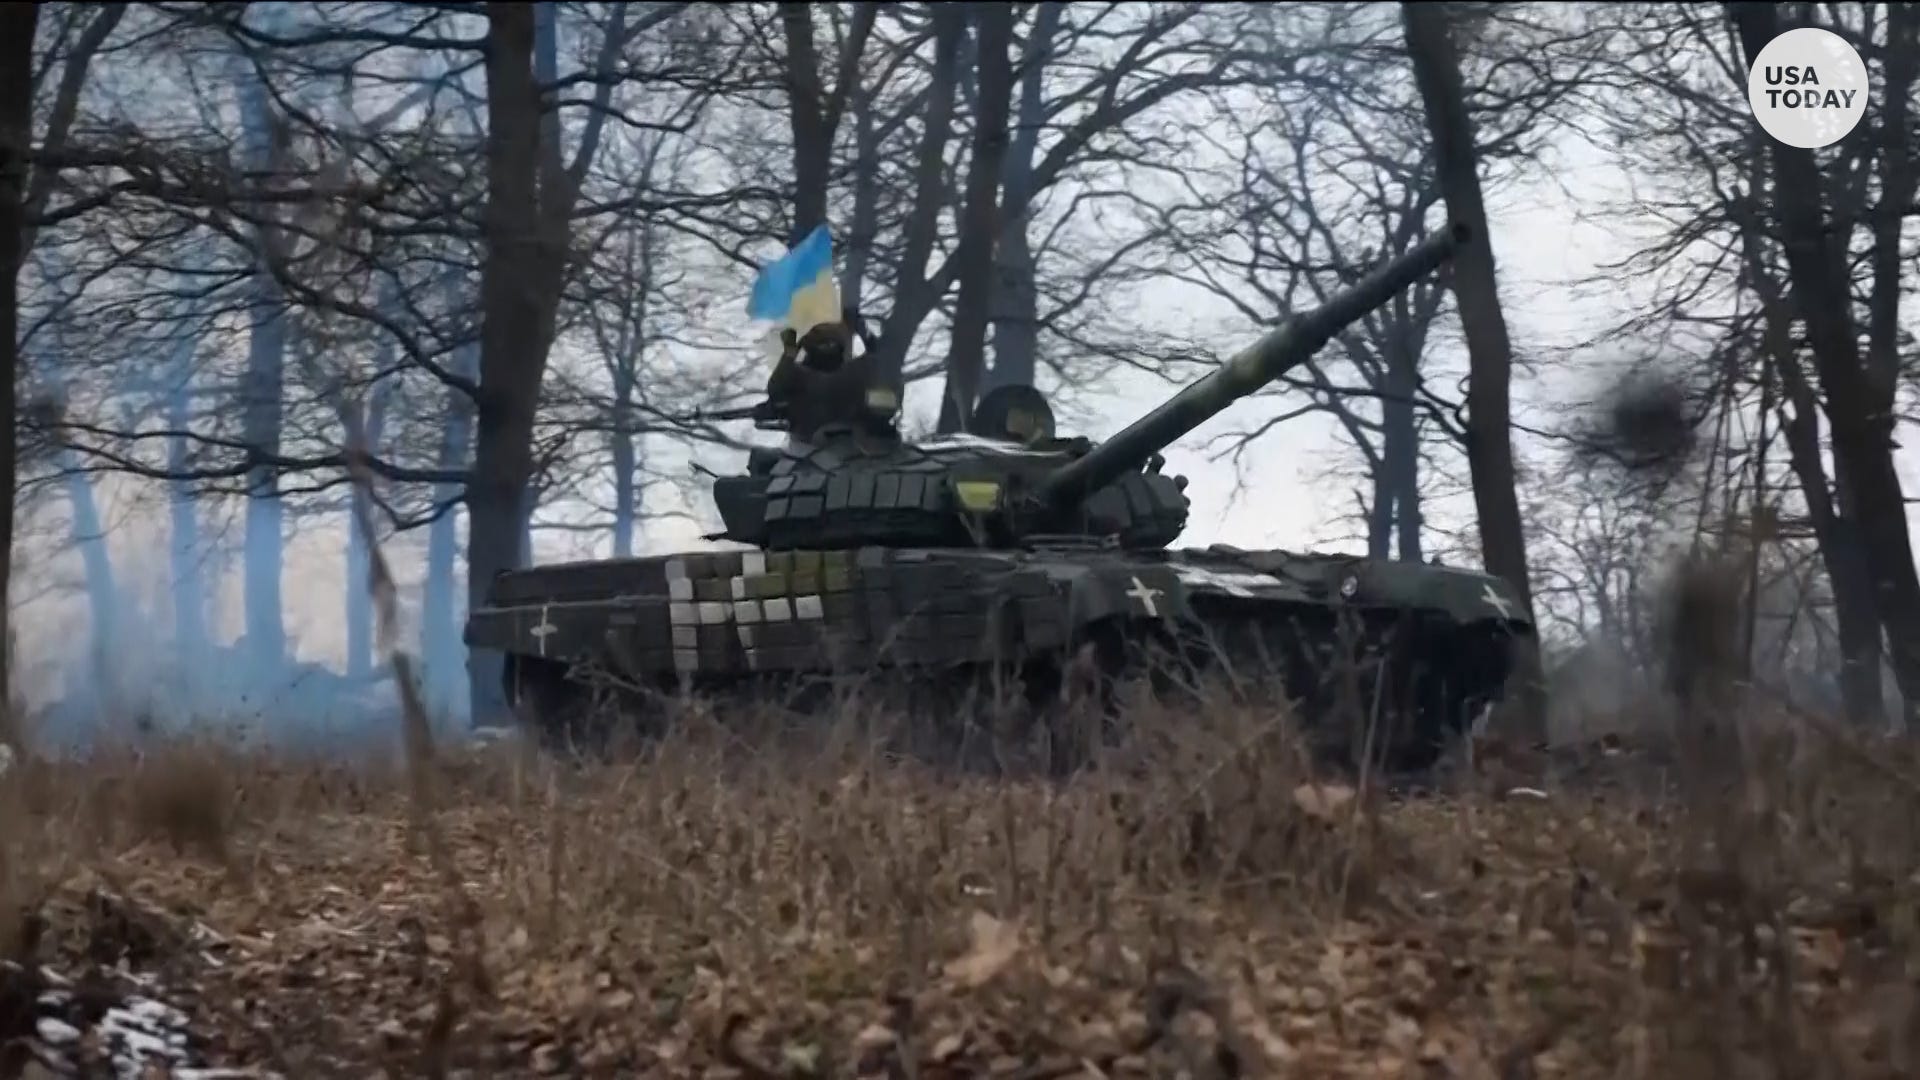 Biden administration plans to send Ukraine battle tanks to help in its war with Russia